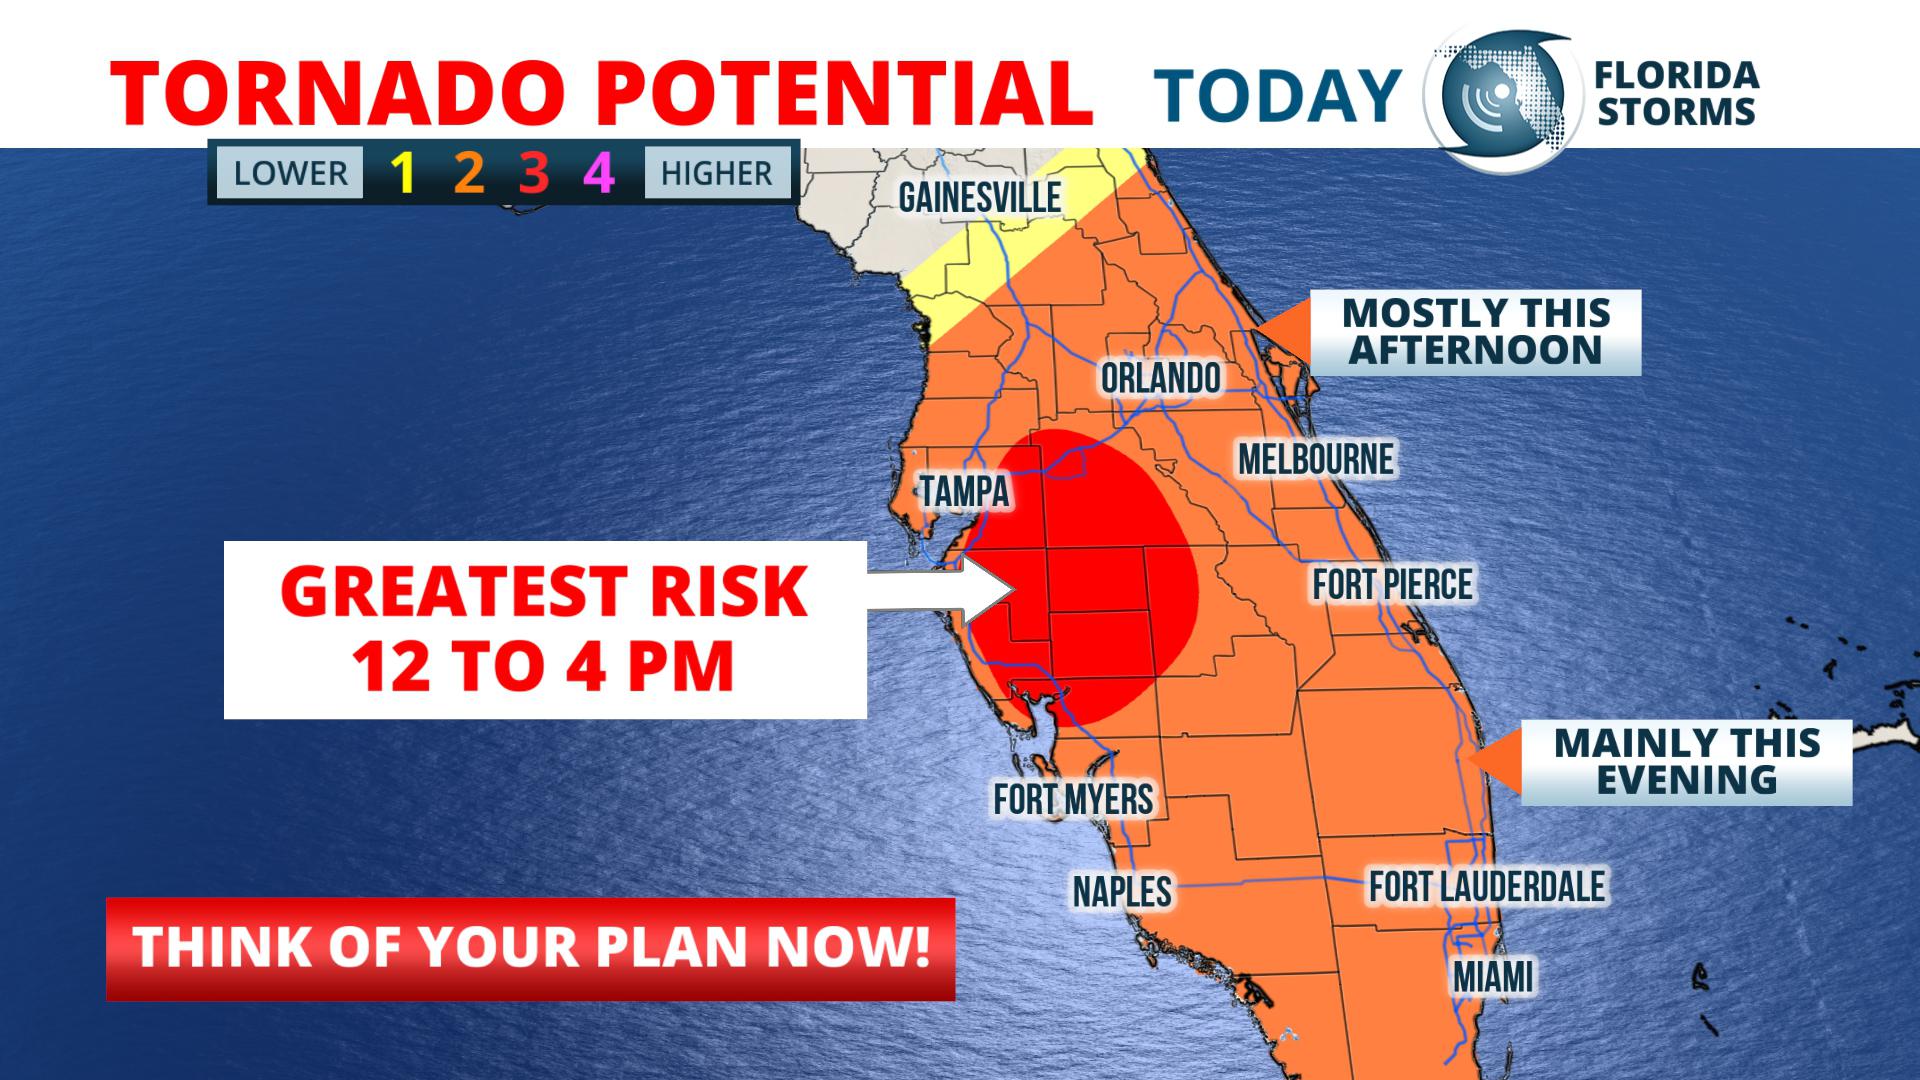 Tornado Watch Issued for Central and Southwest Florida | Florida Storms